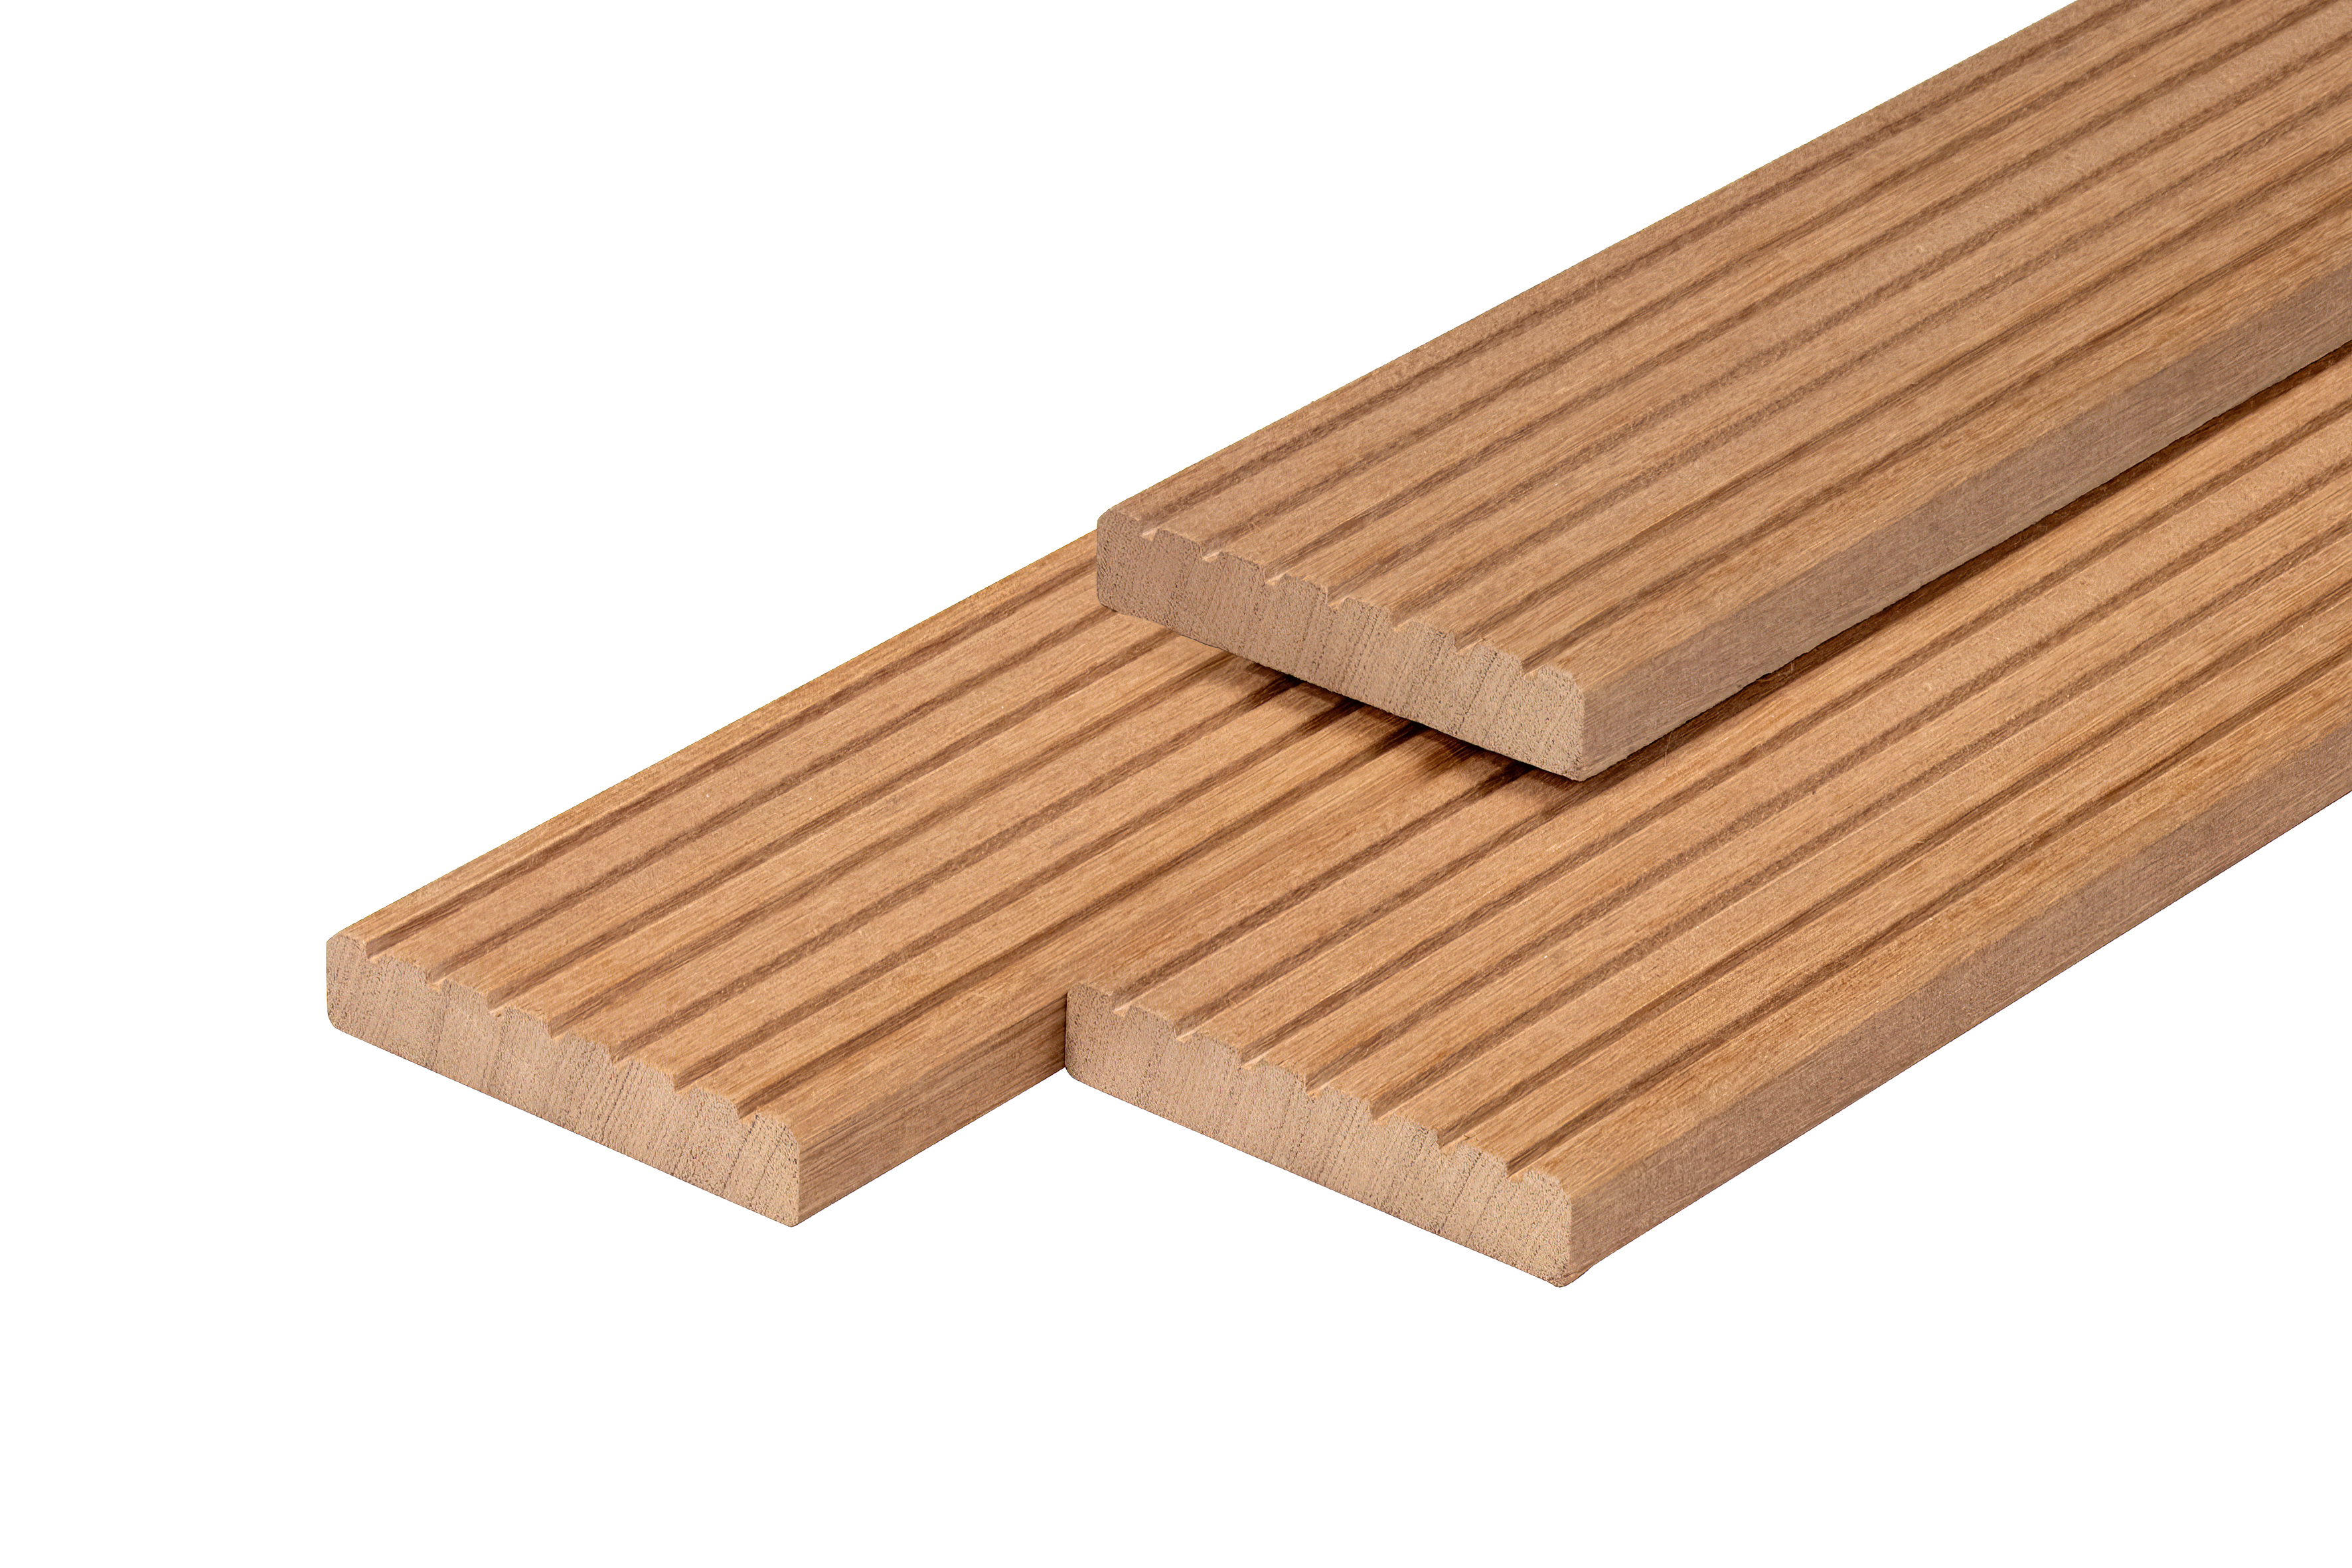 Bangkirai decking board dried 2.5x14.5x245 cm planed 7 grooves + 1 side smooth